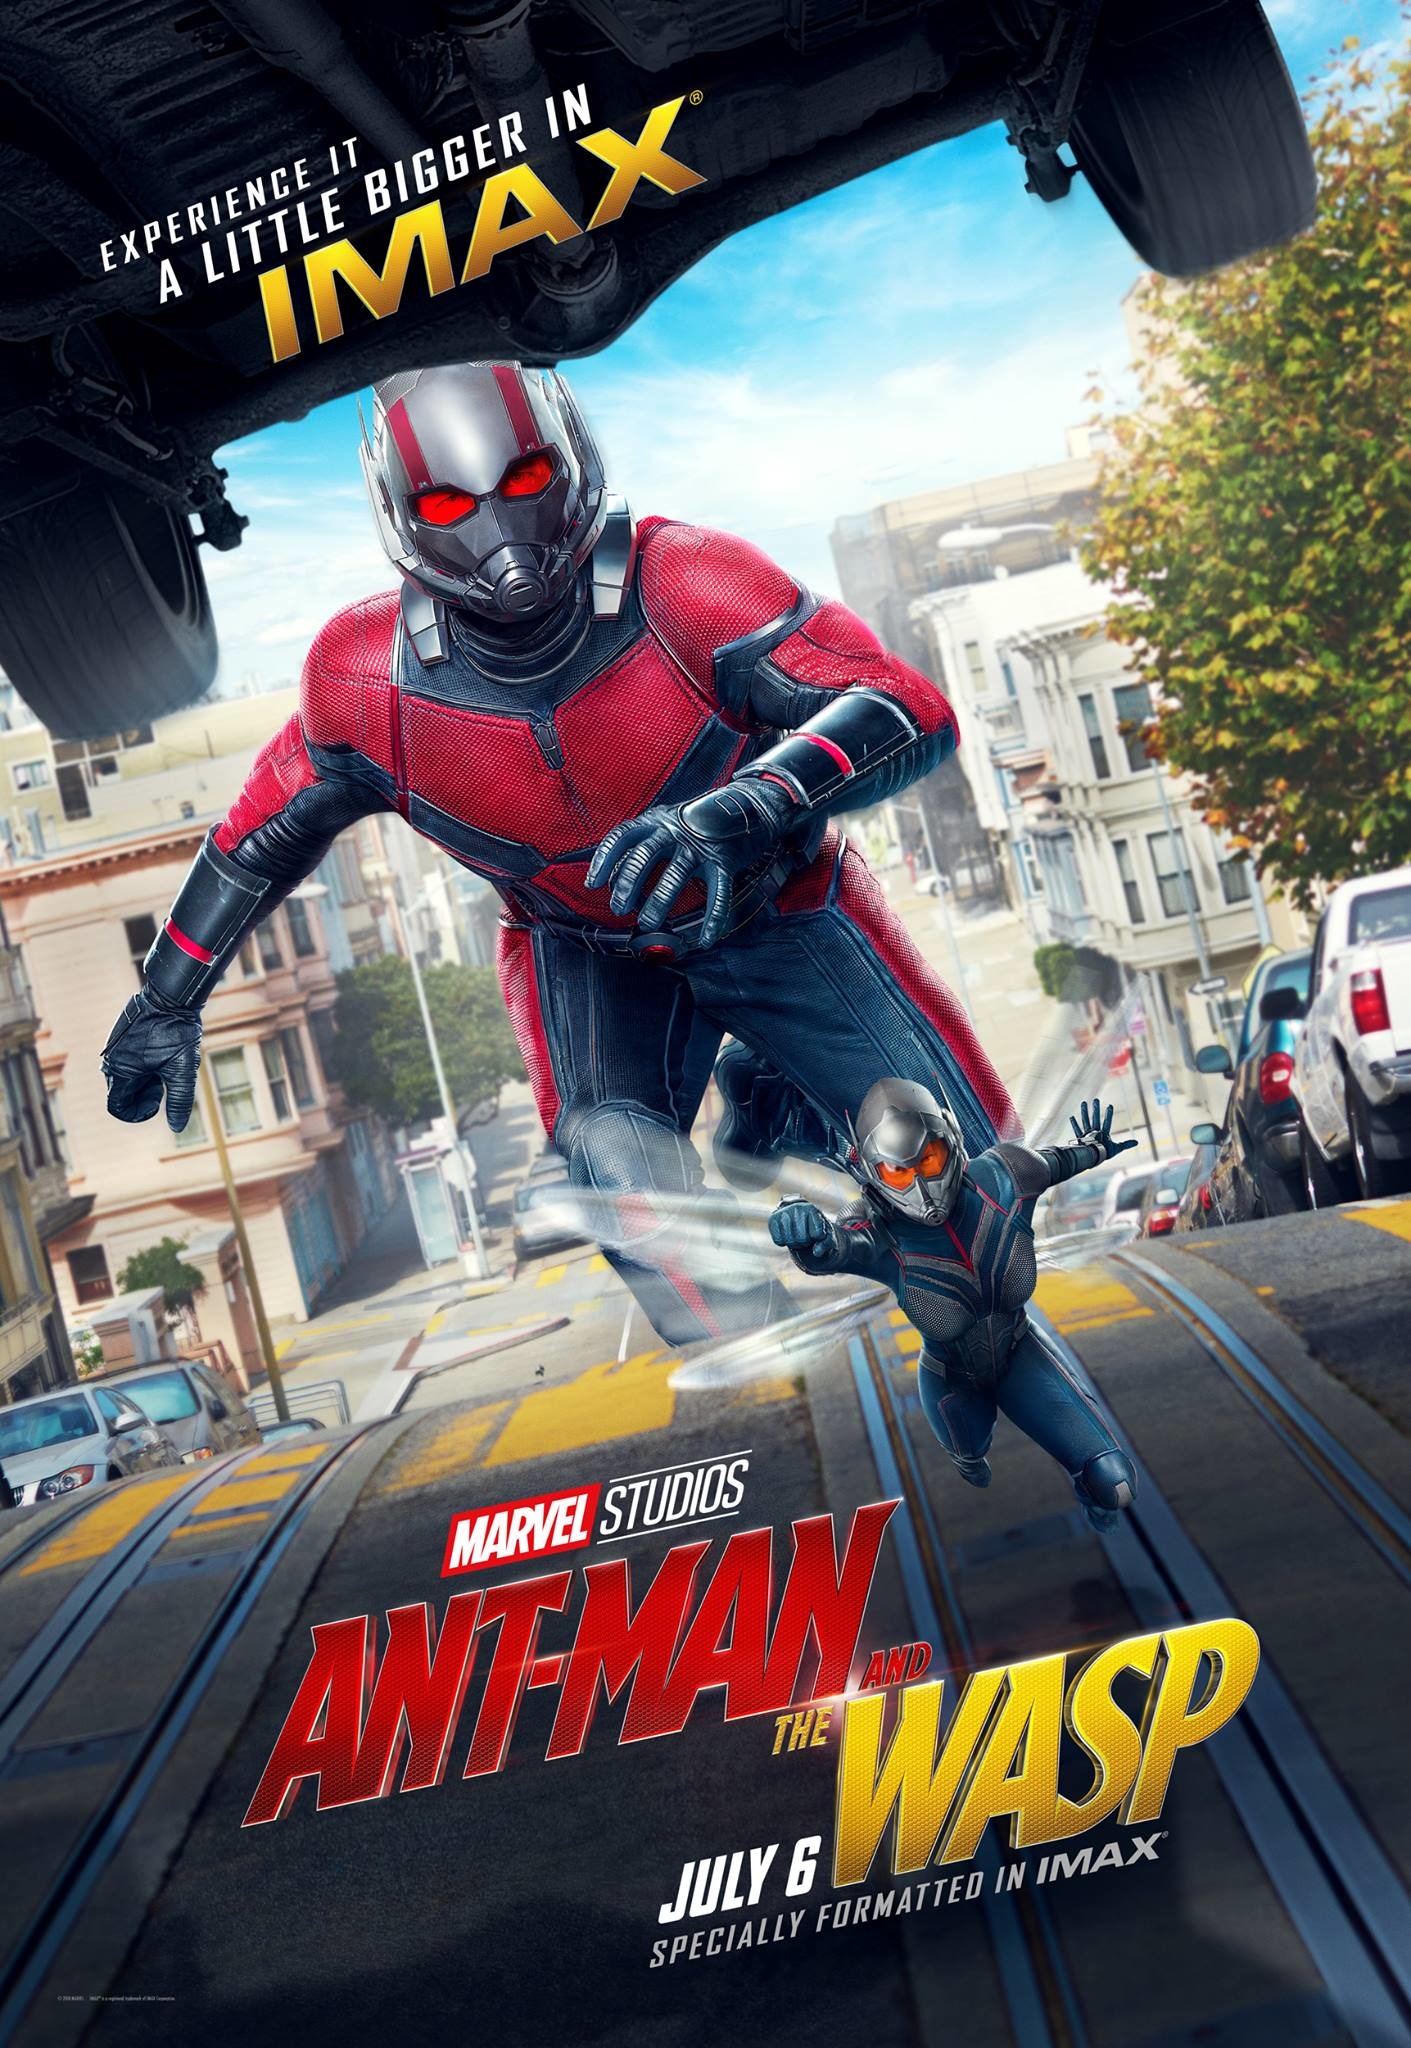 Marvel Studios' Ant-Man and The Wasp - Official Trailer #2 